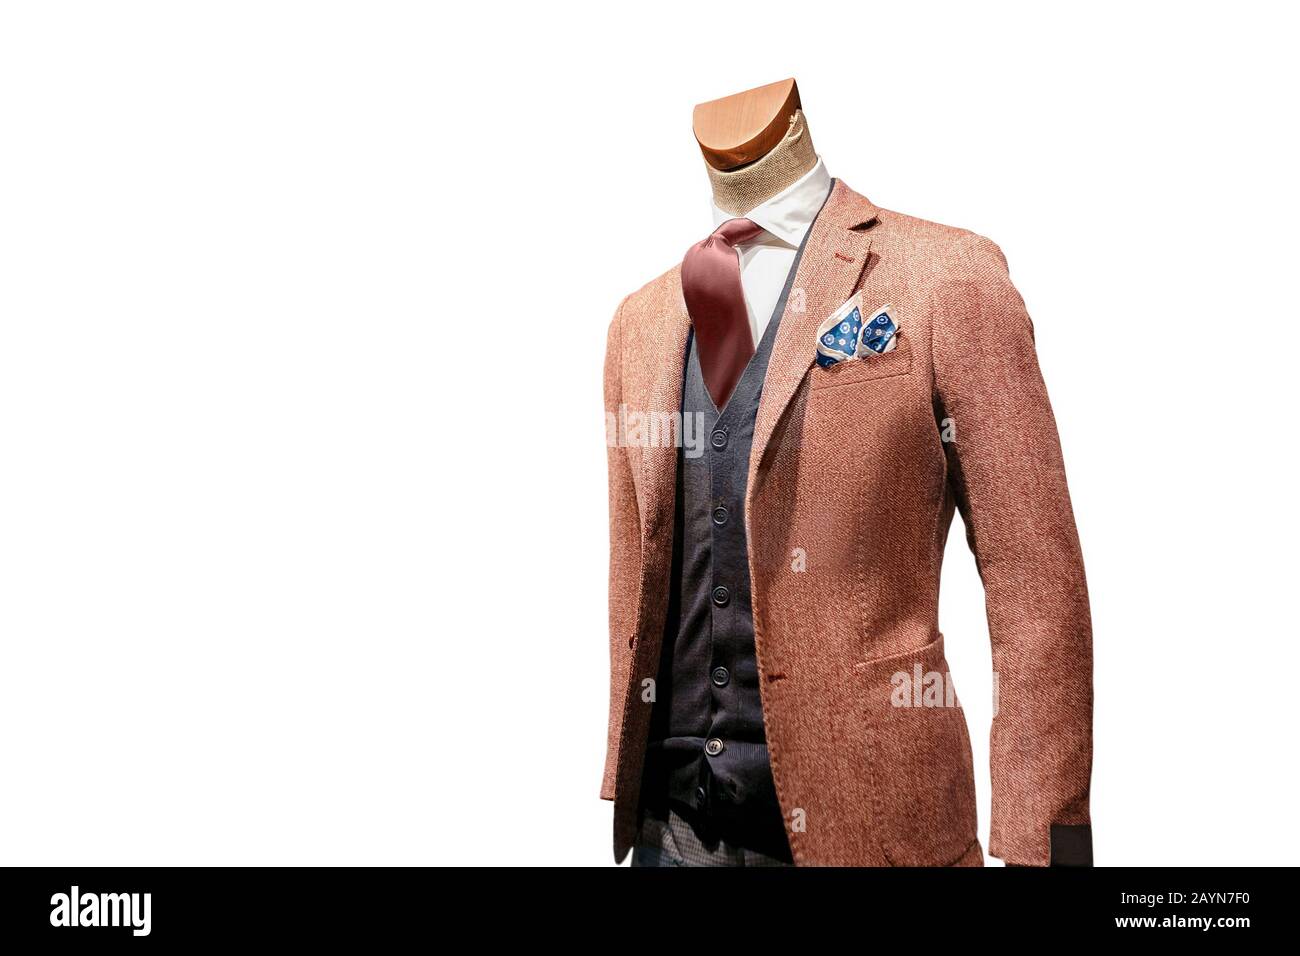 Fashion Jacket suit on the mannequin isolated on the white background Stock Photo